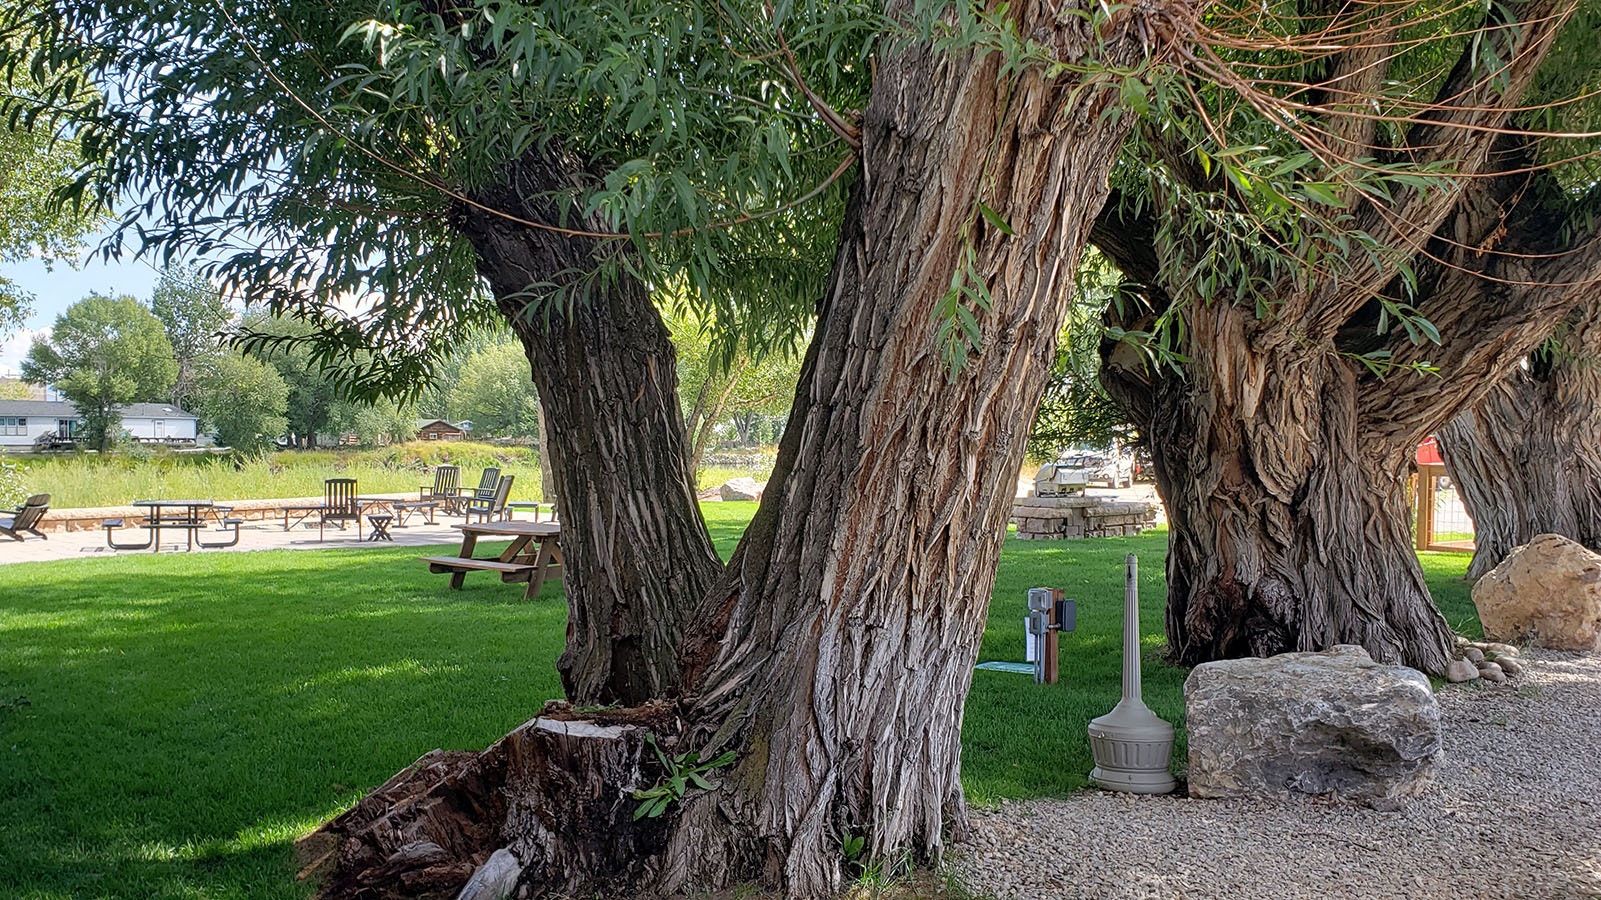 Willow trees that are more than a century old frame a riverside gathering space at the Riviera Motor Lodge.